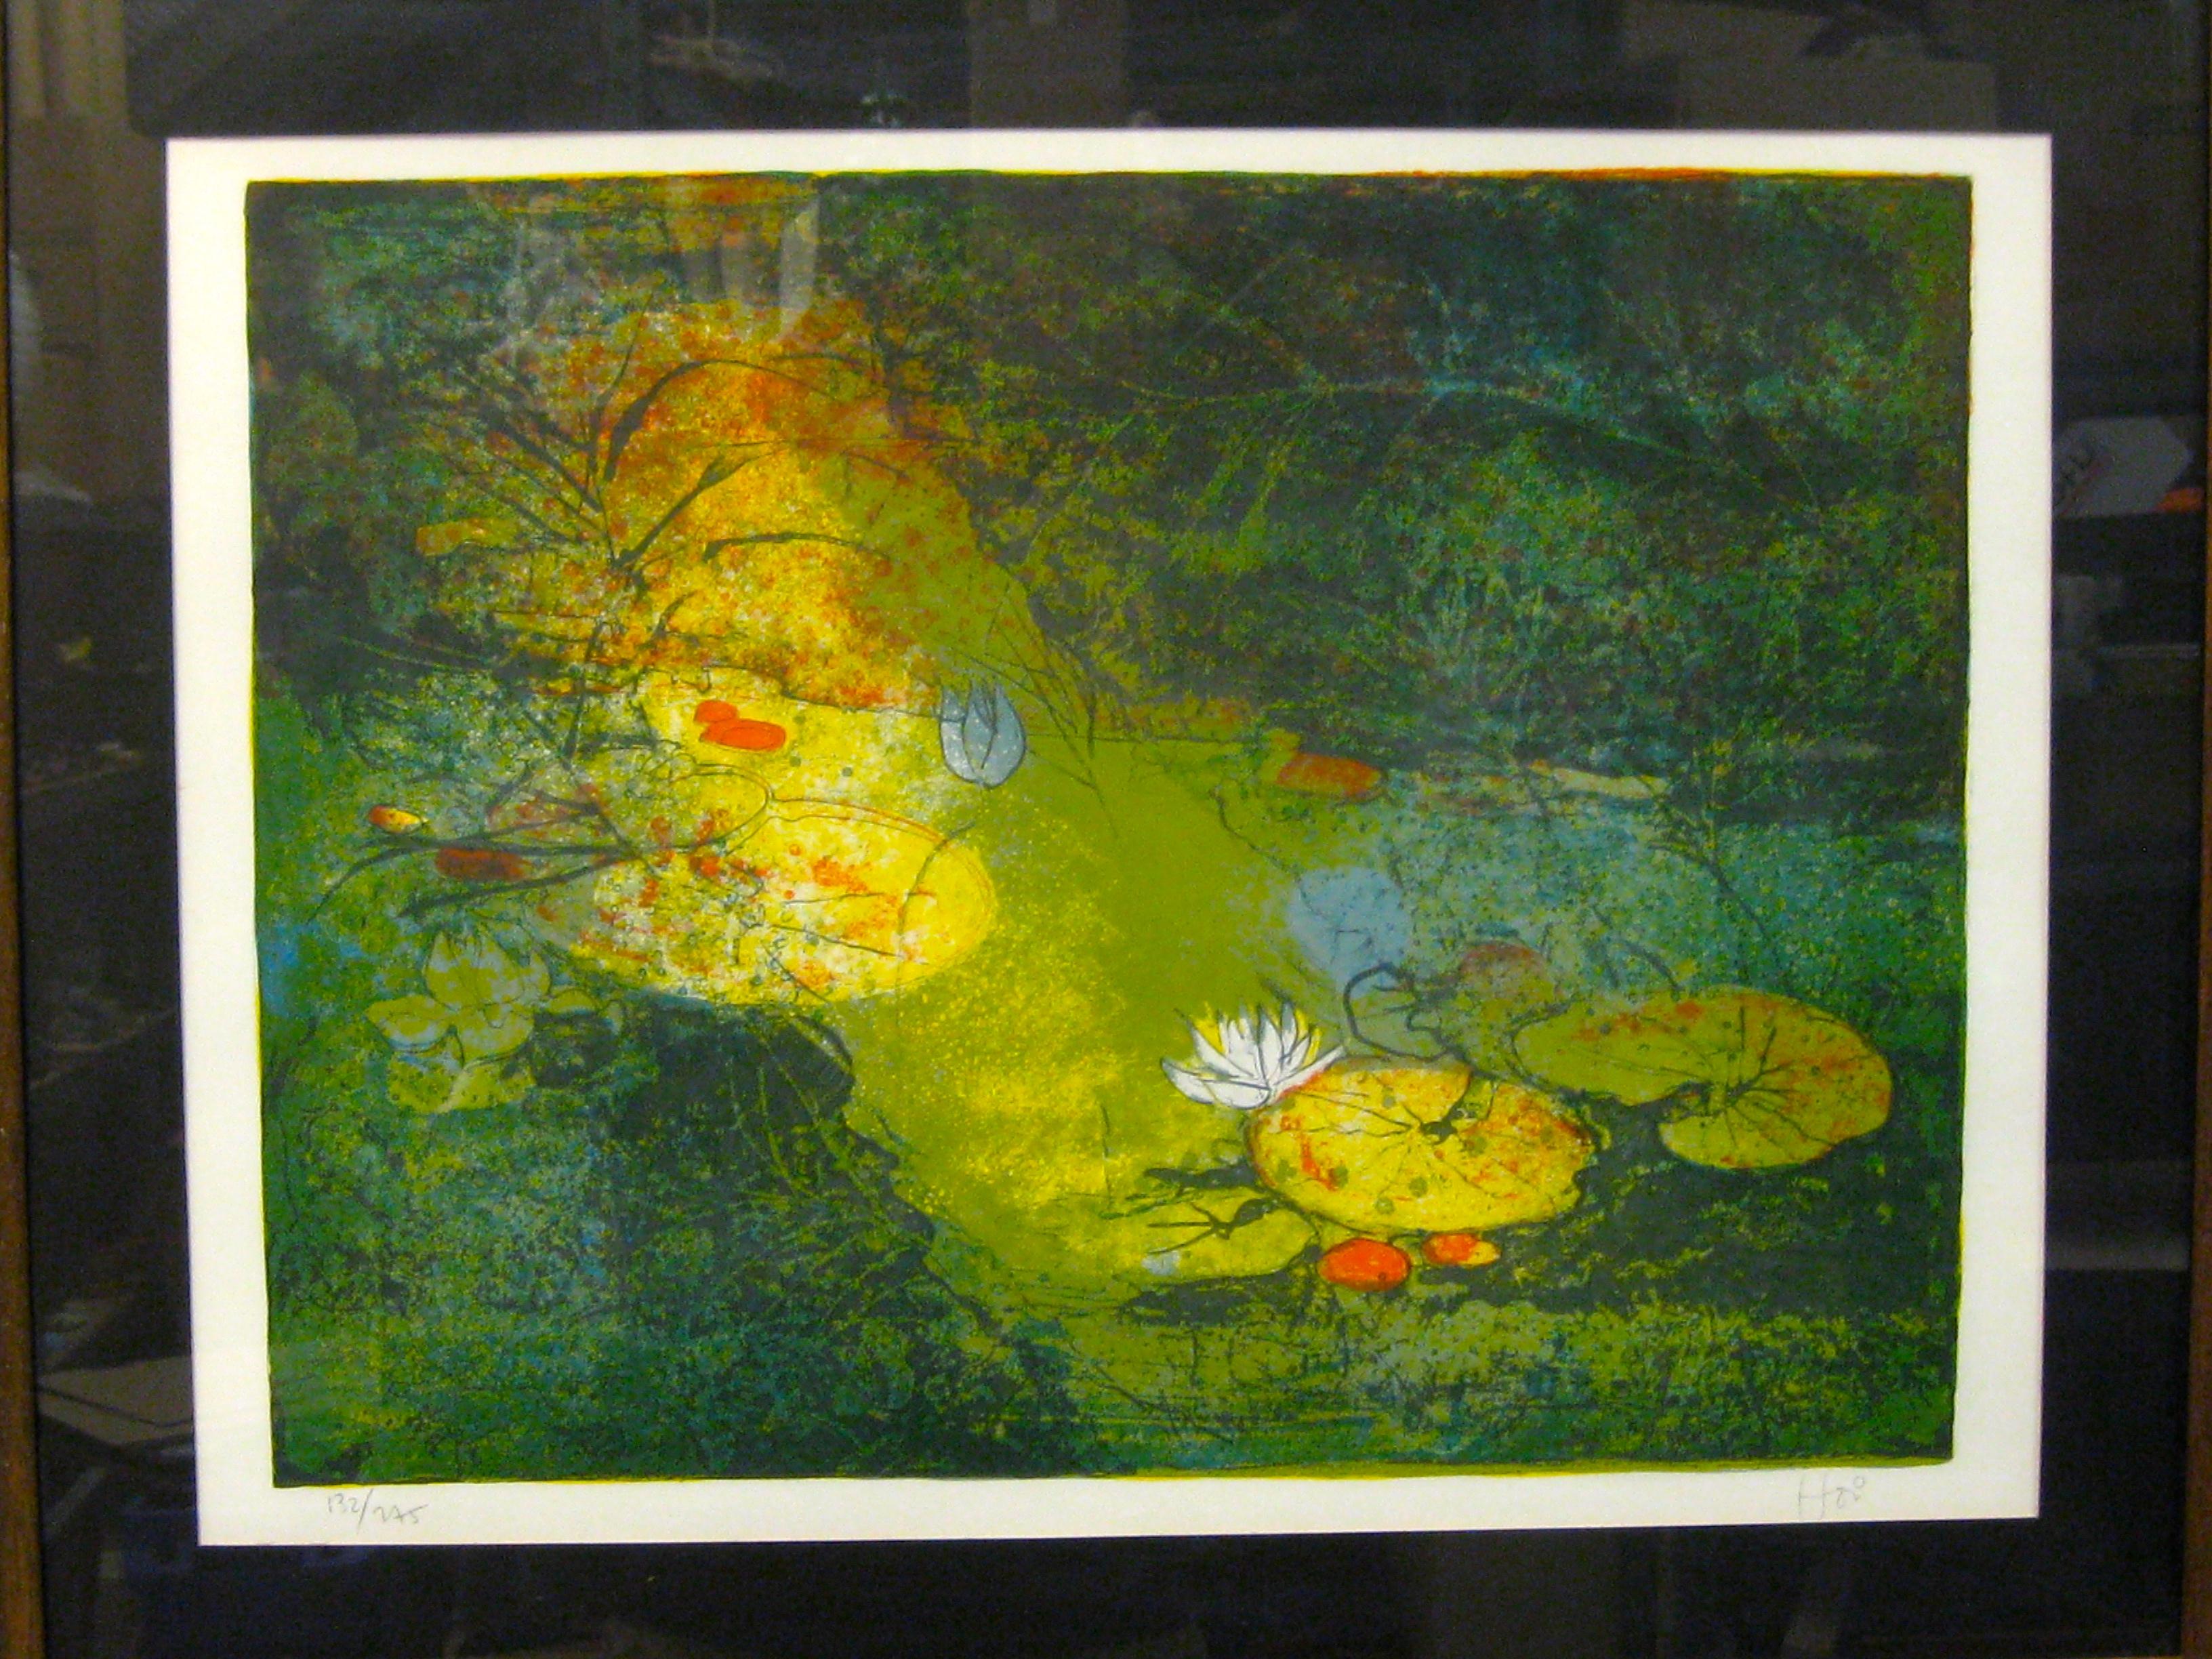 Wonderful hand signed and numbered abstract lithograph by listed Vietnamese Hoi Lebadang, circa 1970's. The abstract lithograph features colorful water lilies. The art was sold through The Collector’s Guild in New York City. Comes in its original